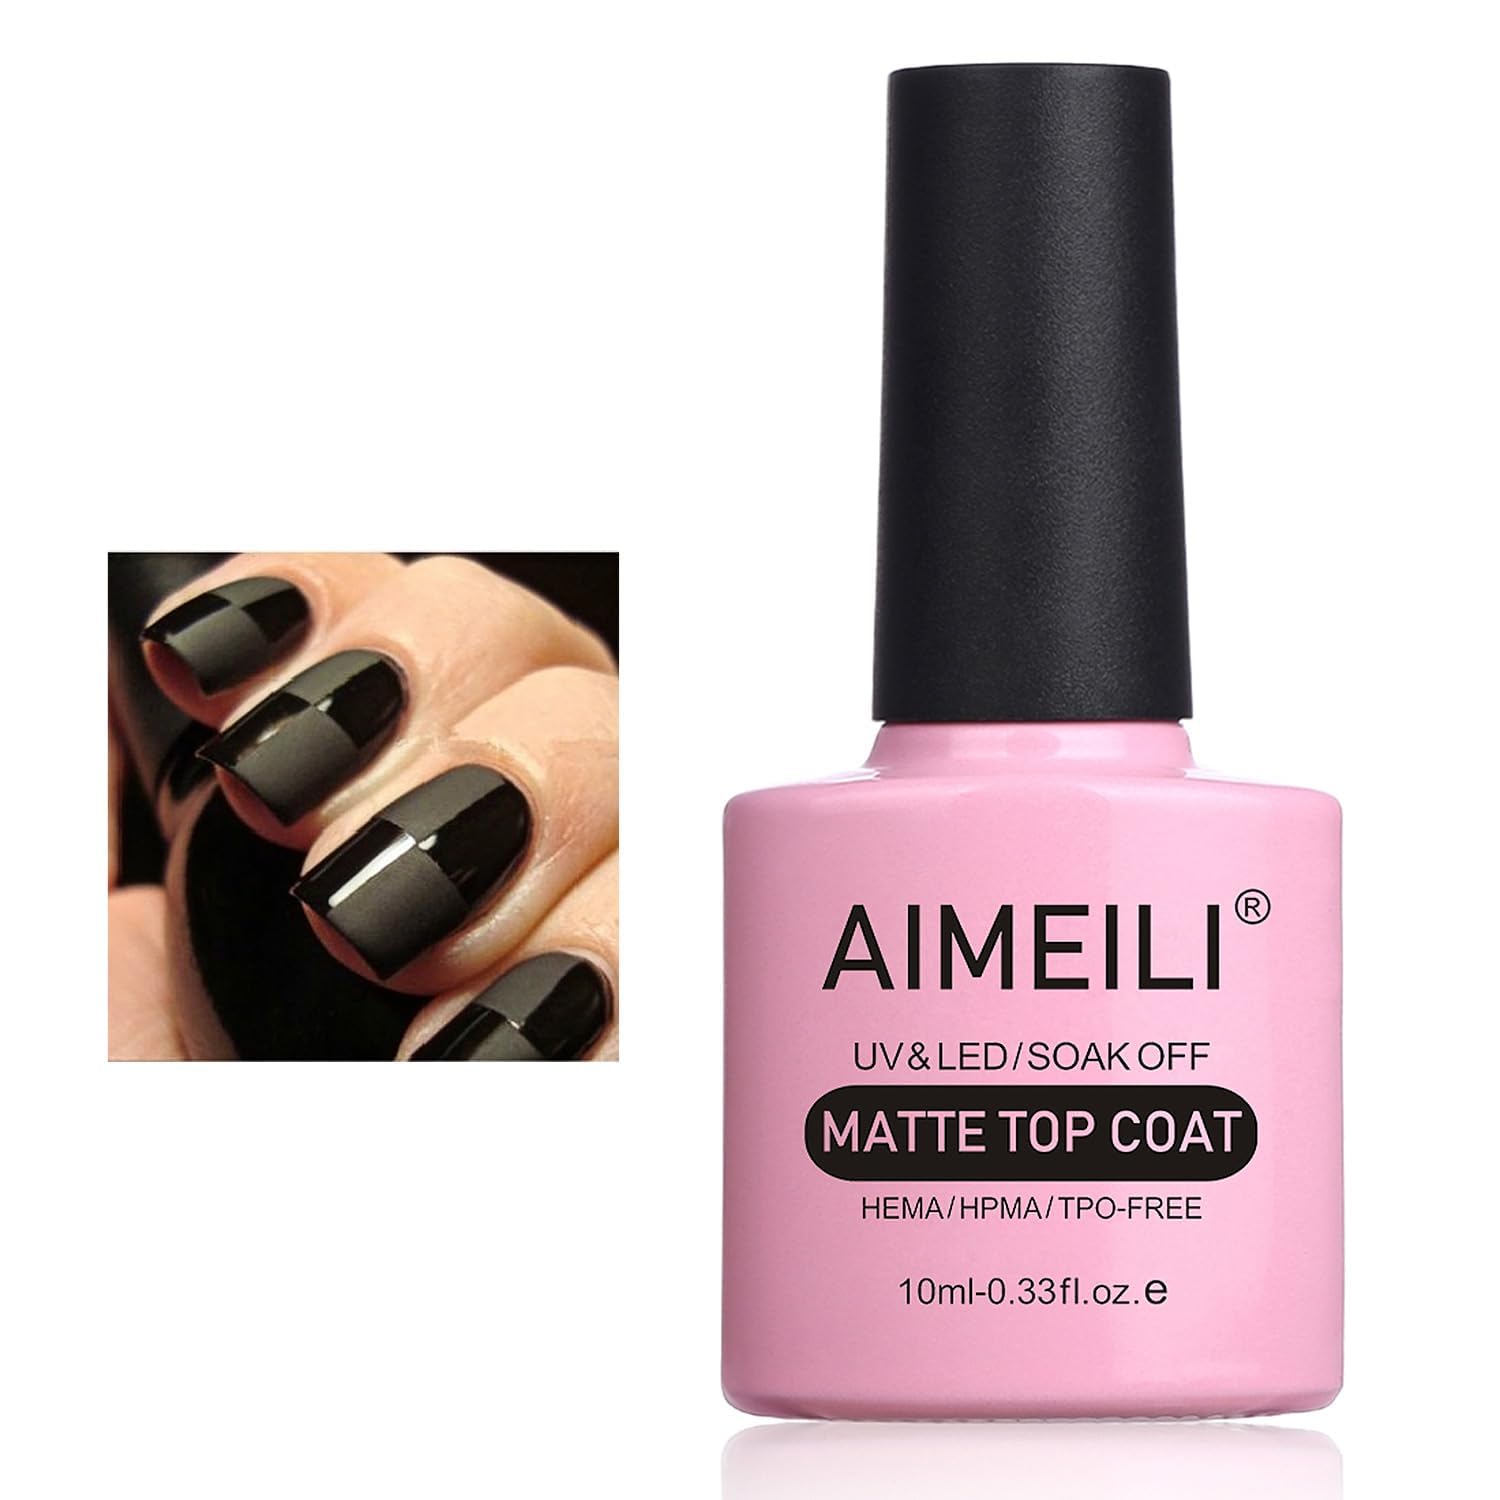 MI Fashion Matte Finish Get a Smooth, Velvety Look with Our Matte Nail